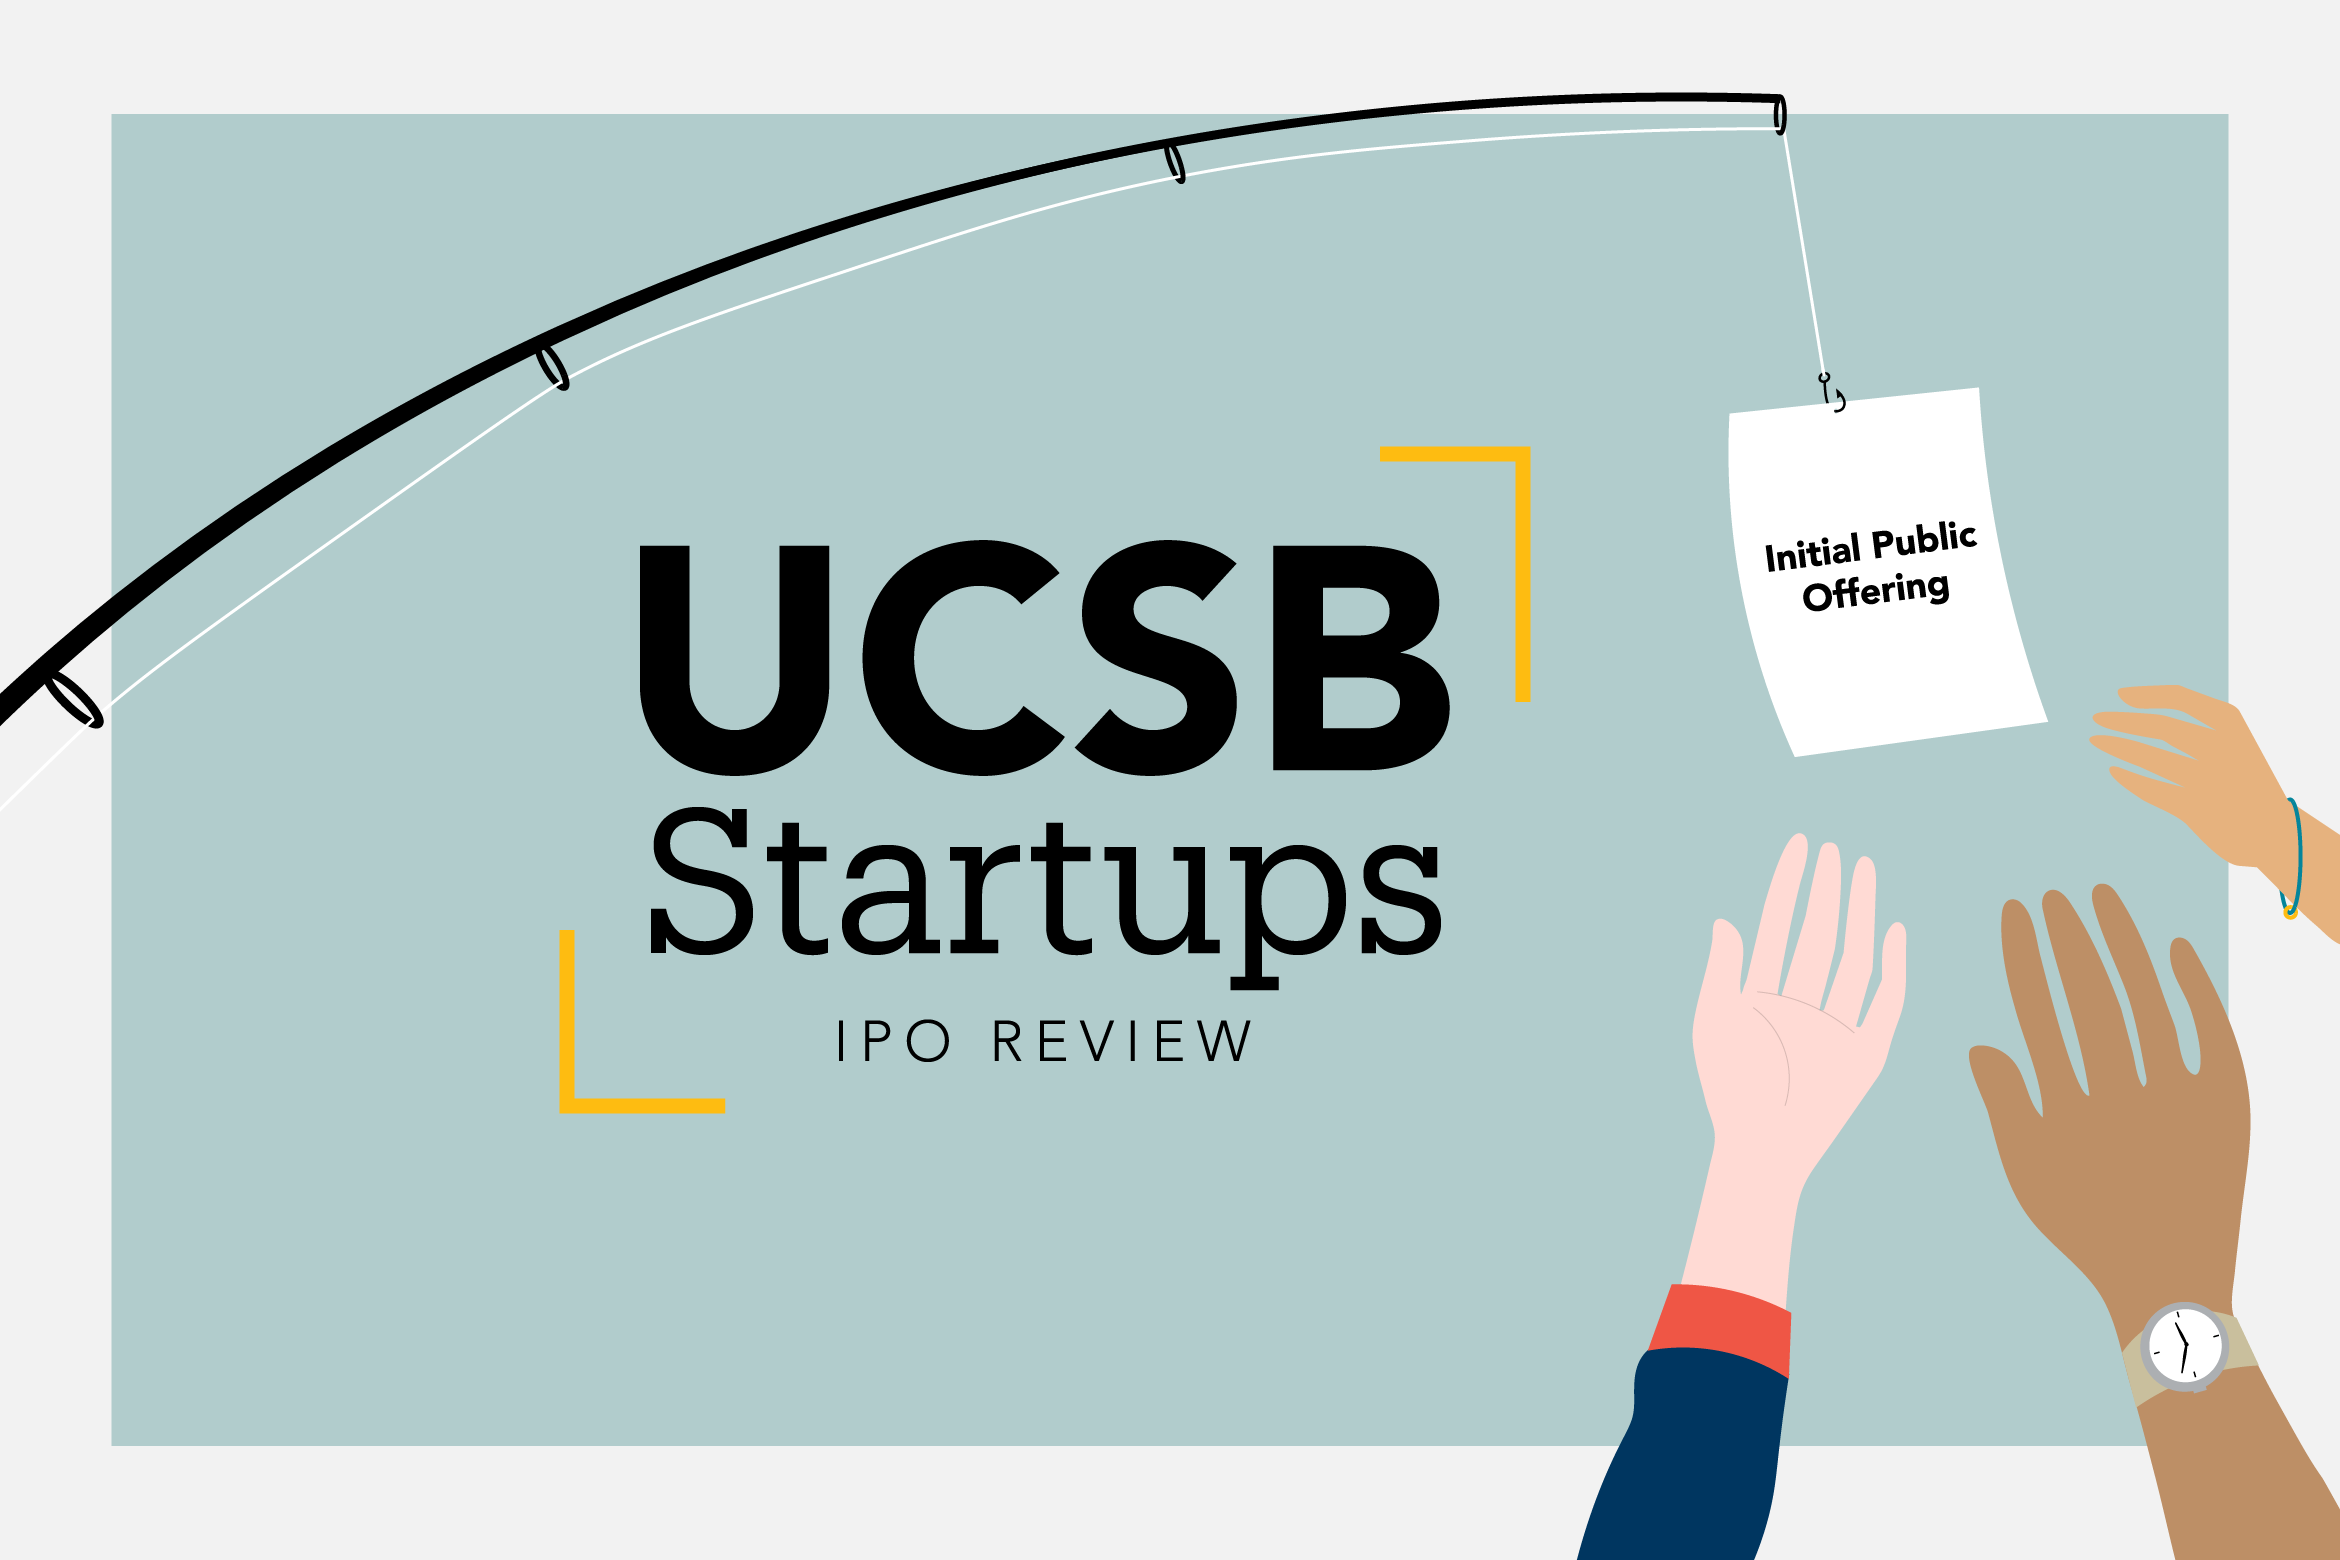 UCSB Startups IPO